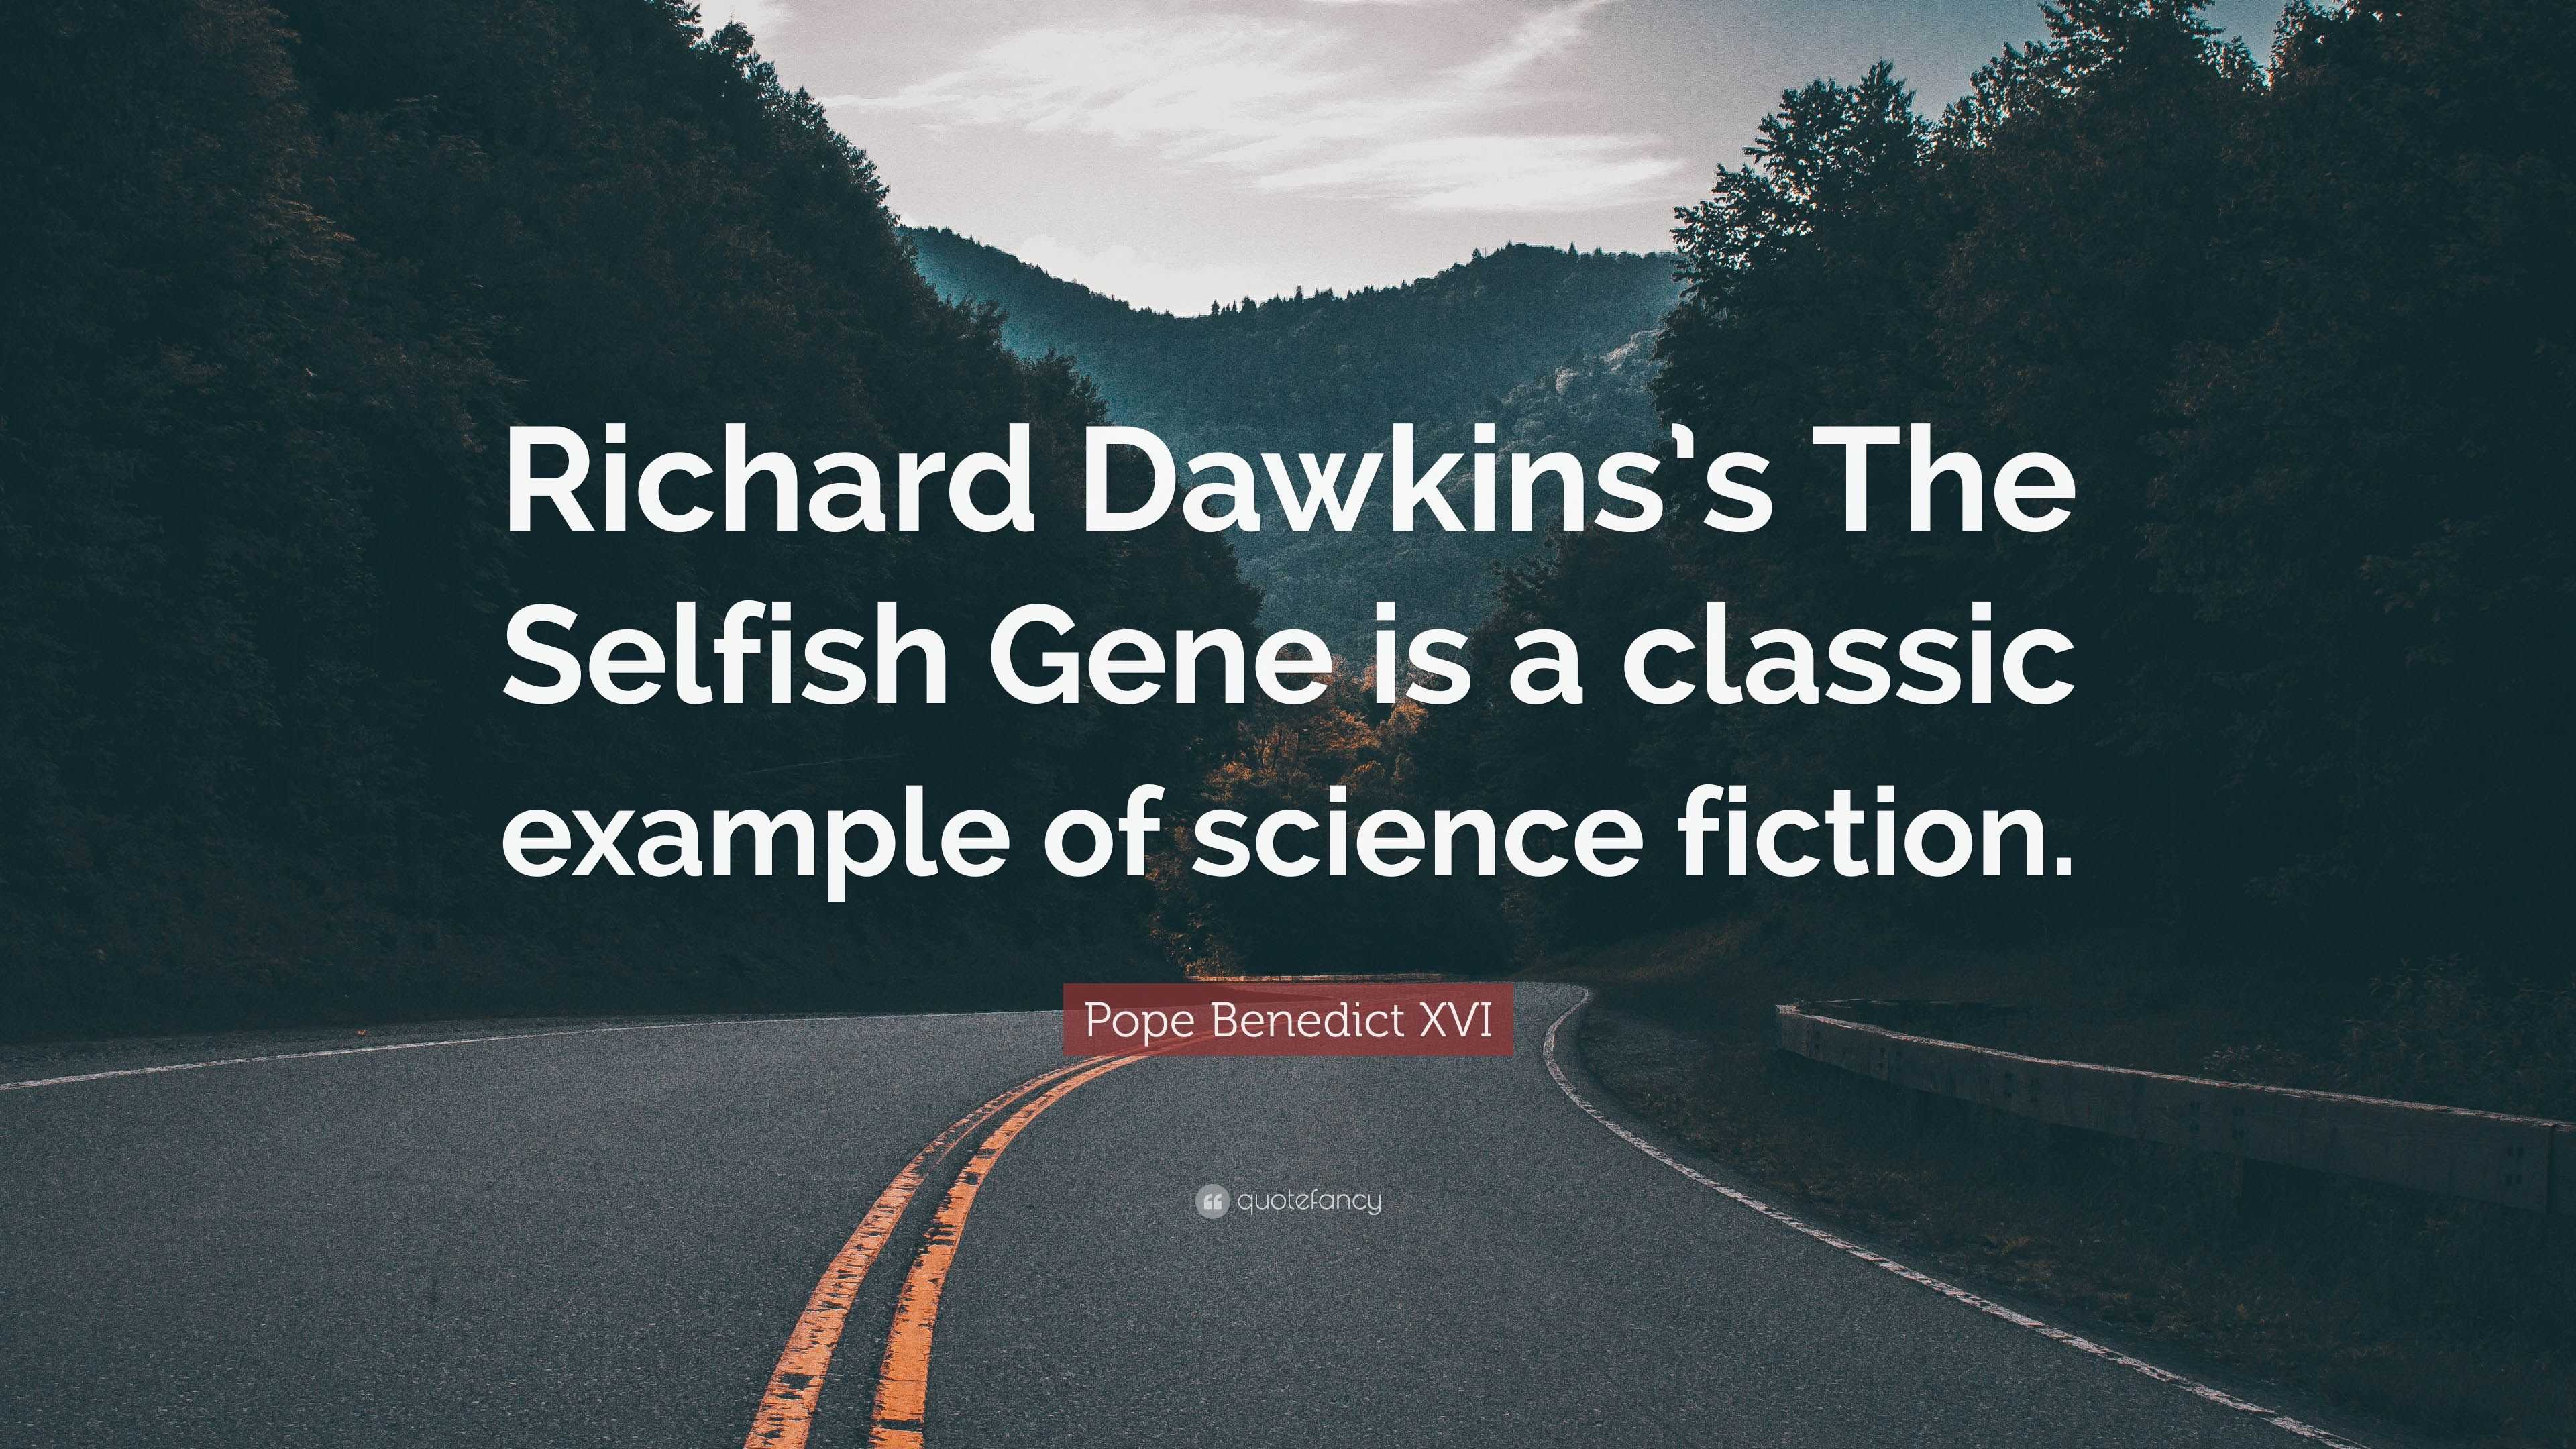 Pope Benedict Xvi Quote: “Richard Dawkins's The Selfish Gene Is A Classic Example Of Science Fiction.”